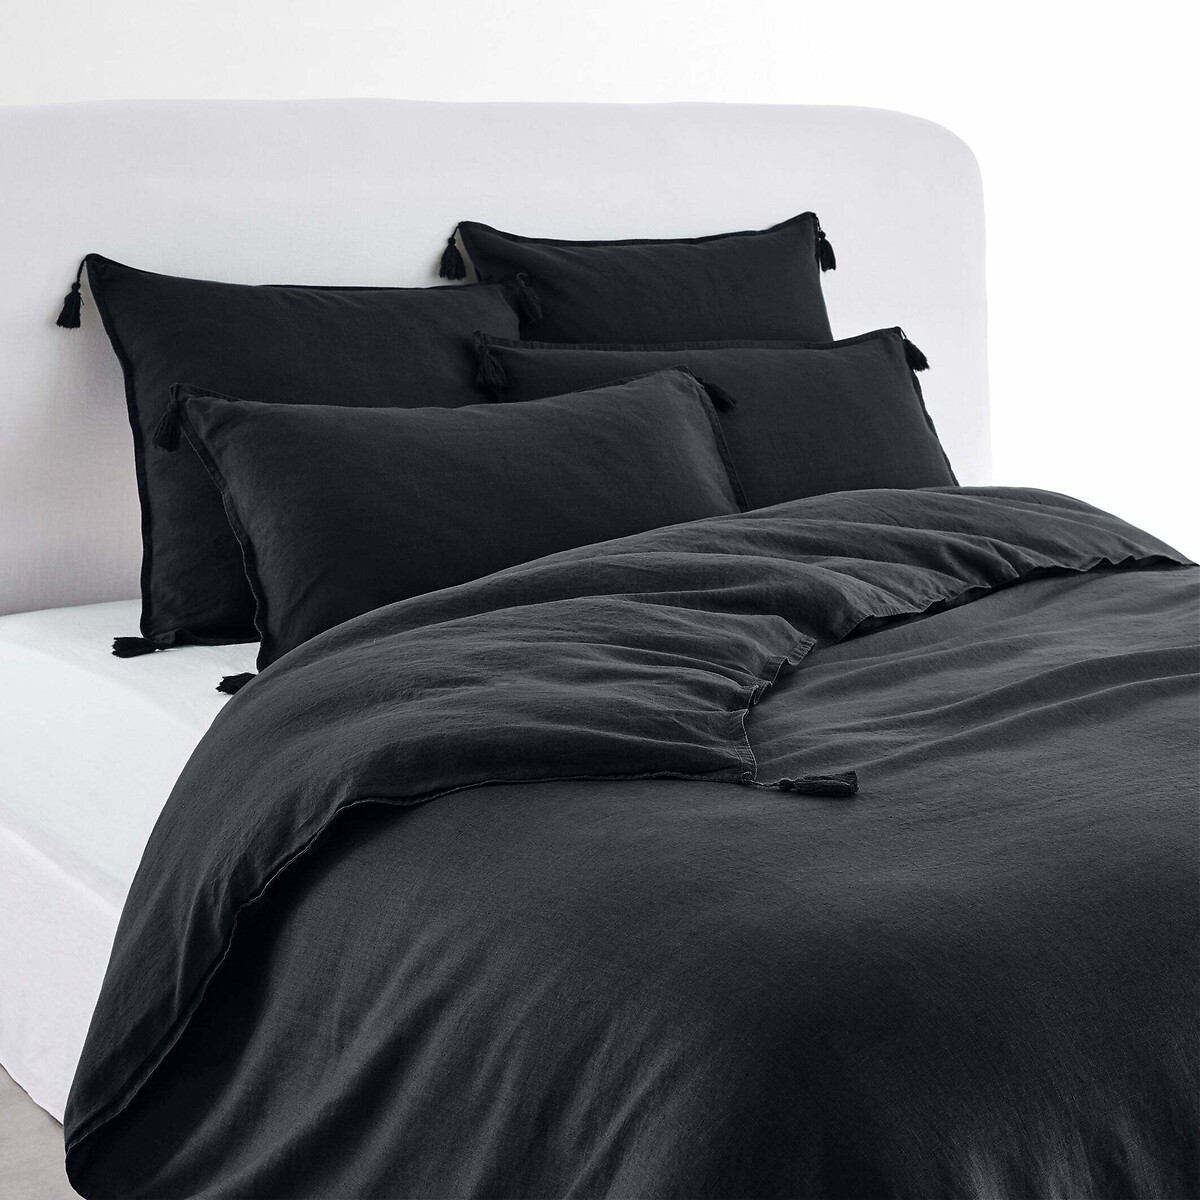 Carly Tassel 100% Washed Linen Duvet Cover